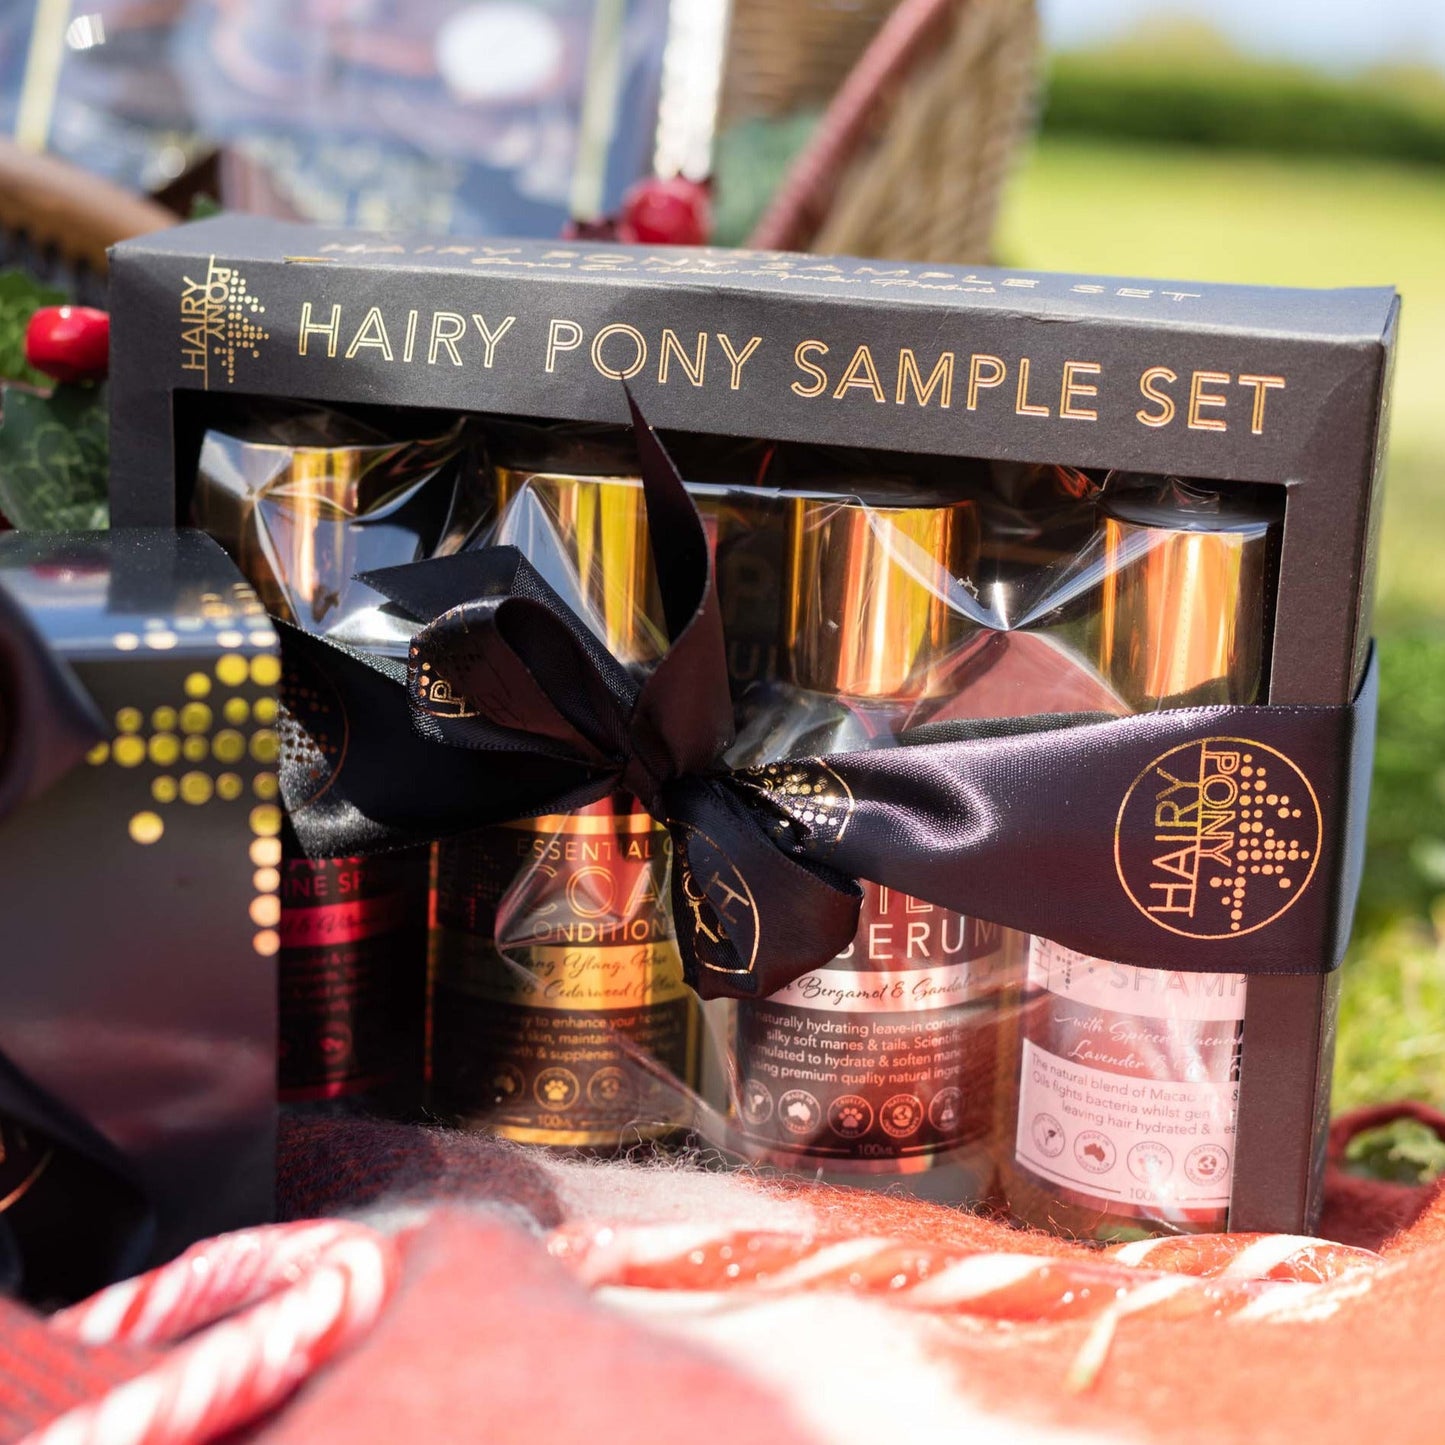 The Hairy Pony Grooming Sample Set